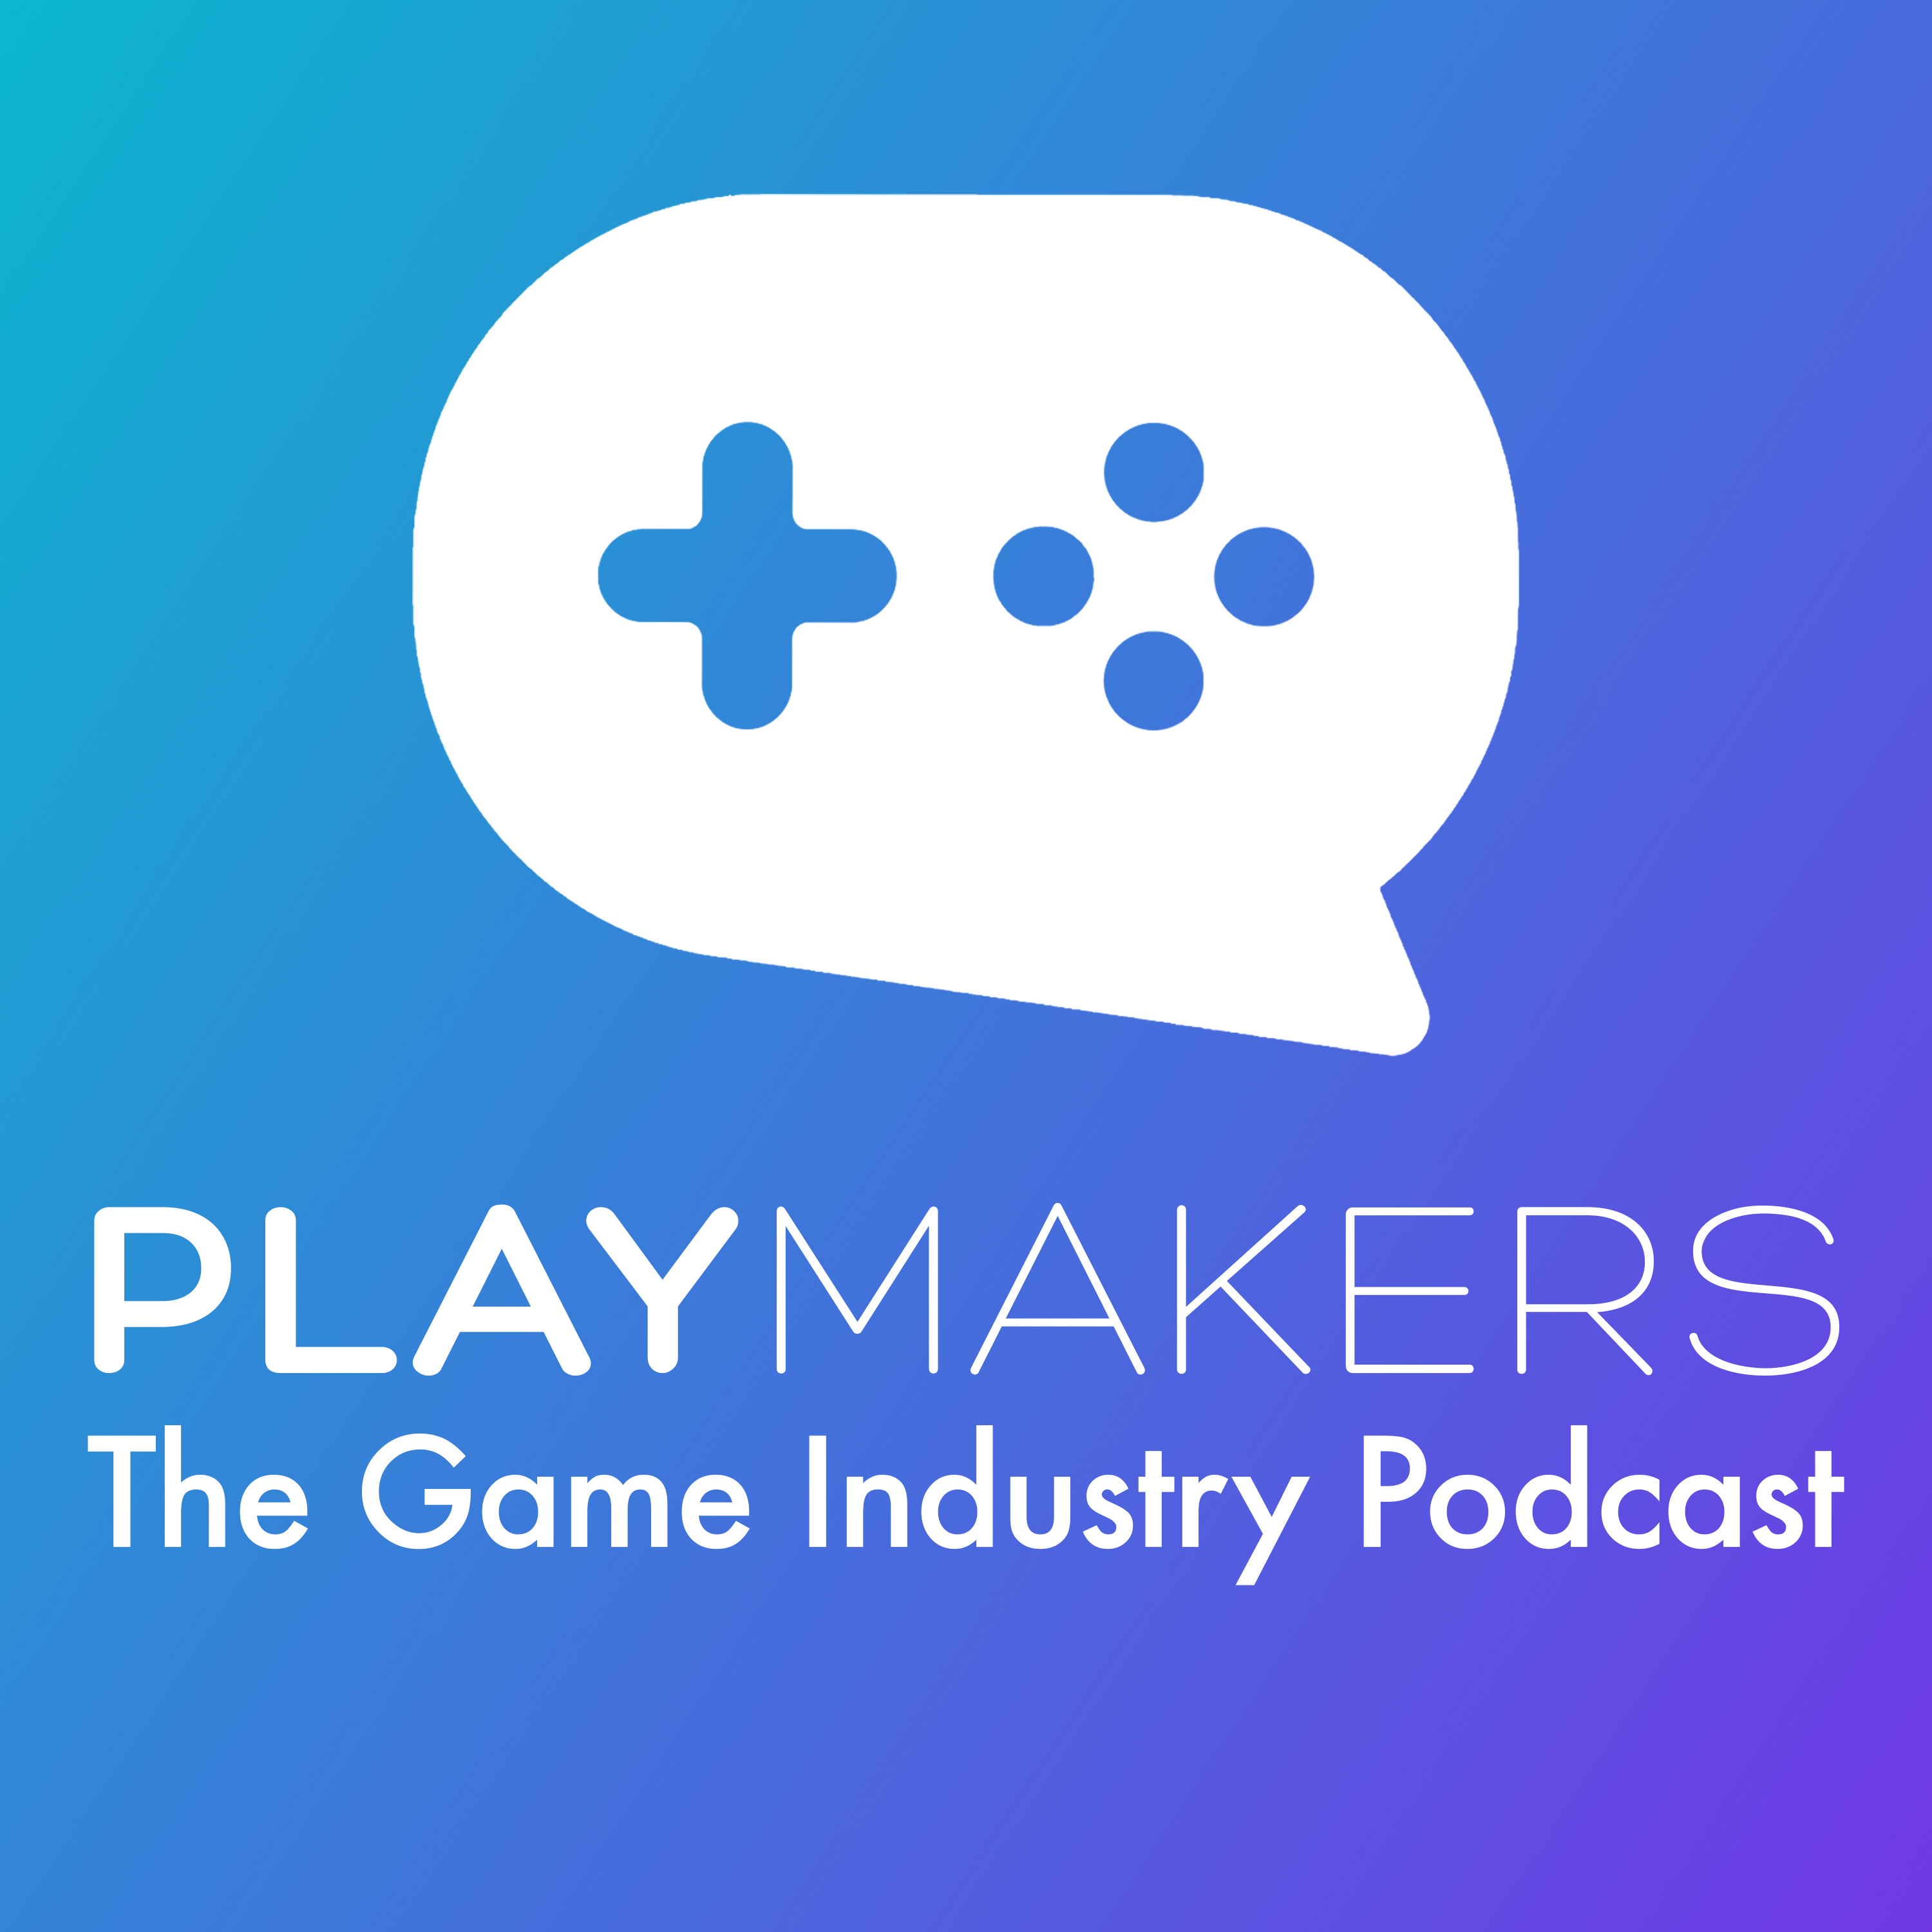 Season 2 Trailer of Playmakers: The Game Industry Podcast!